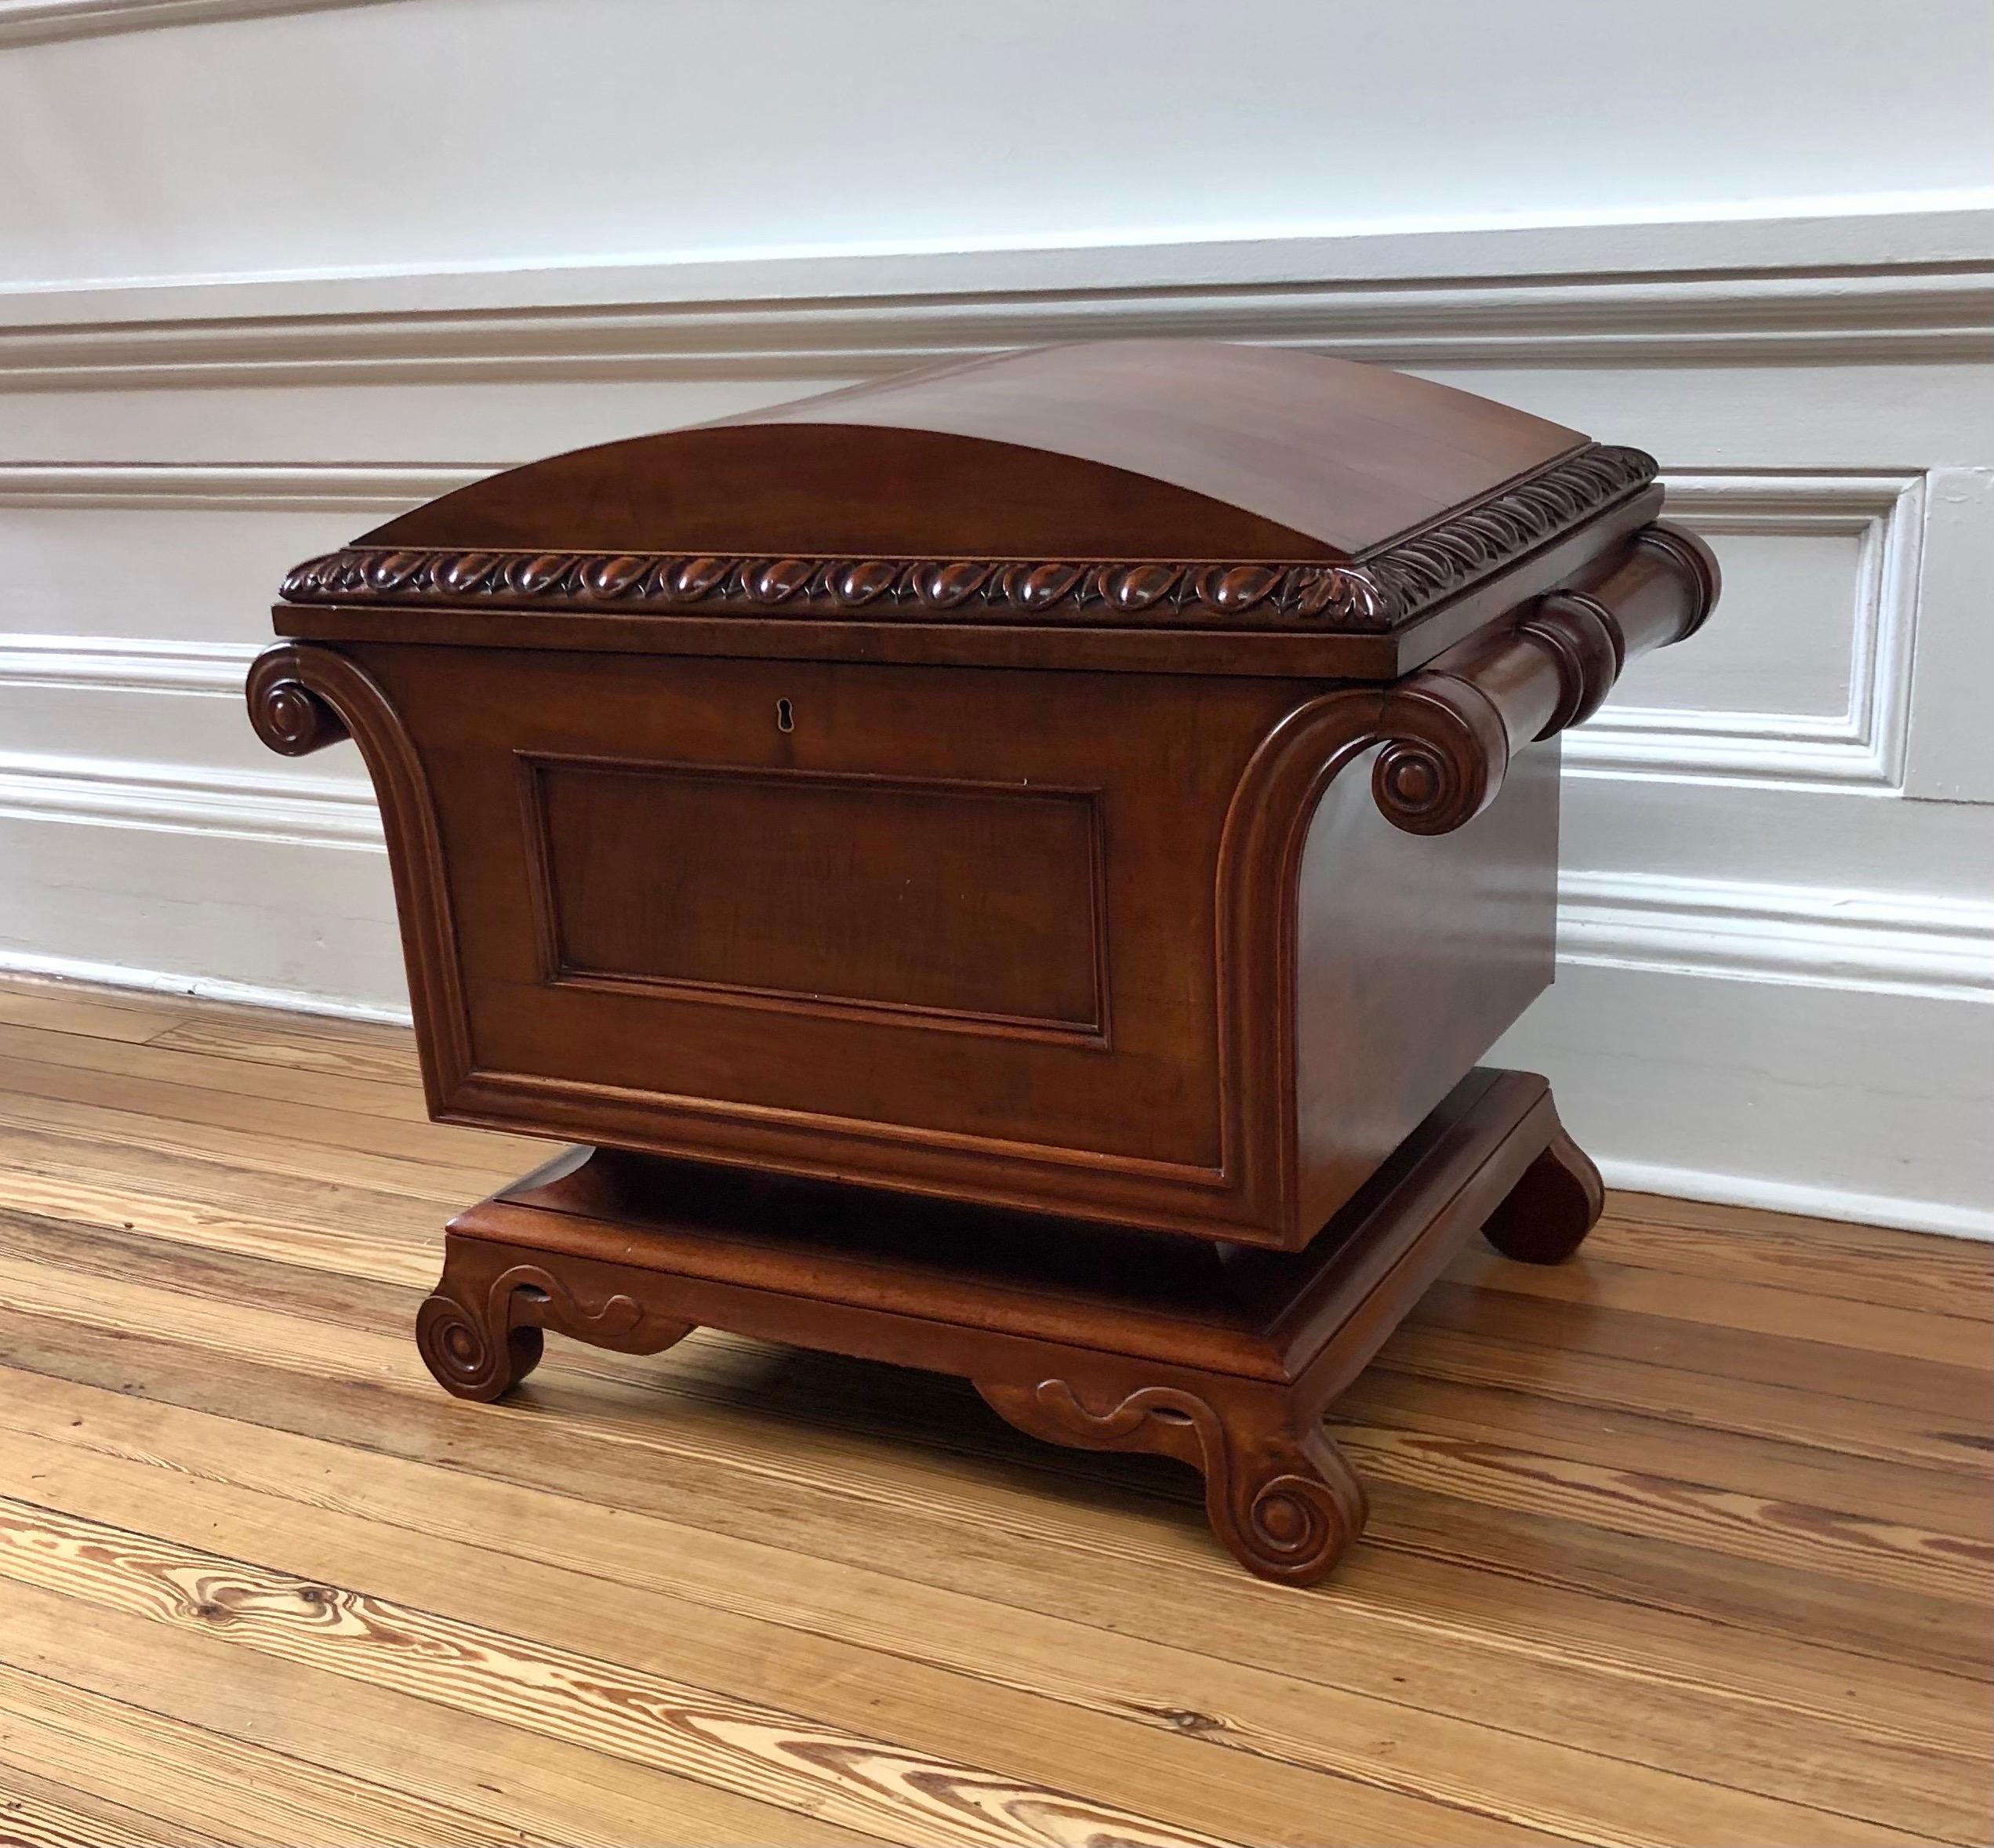 Carved Classical English Regency Sarcophagus Mahogany Dome Top Cellarette / Office File For Sale